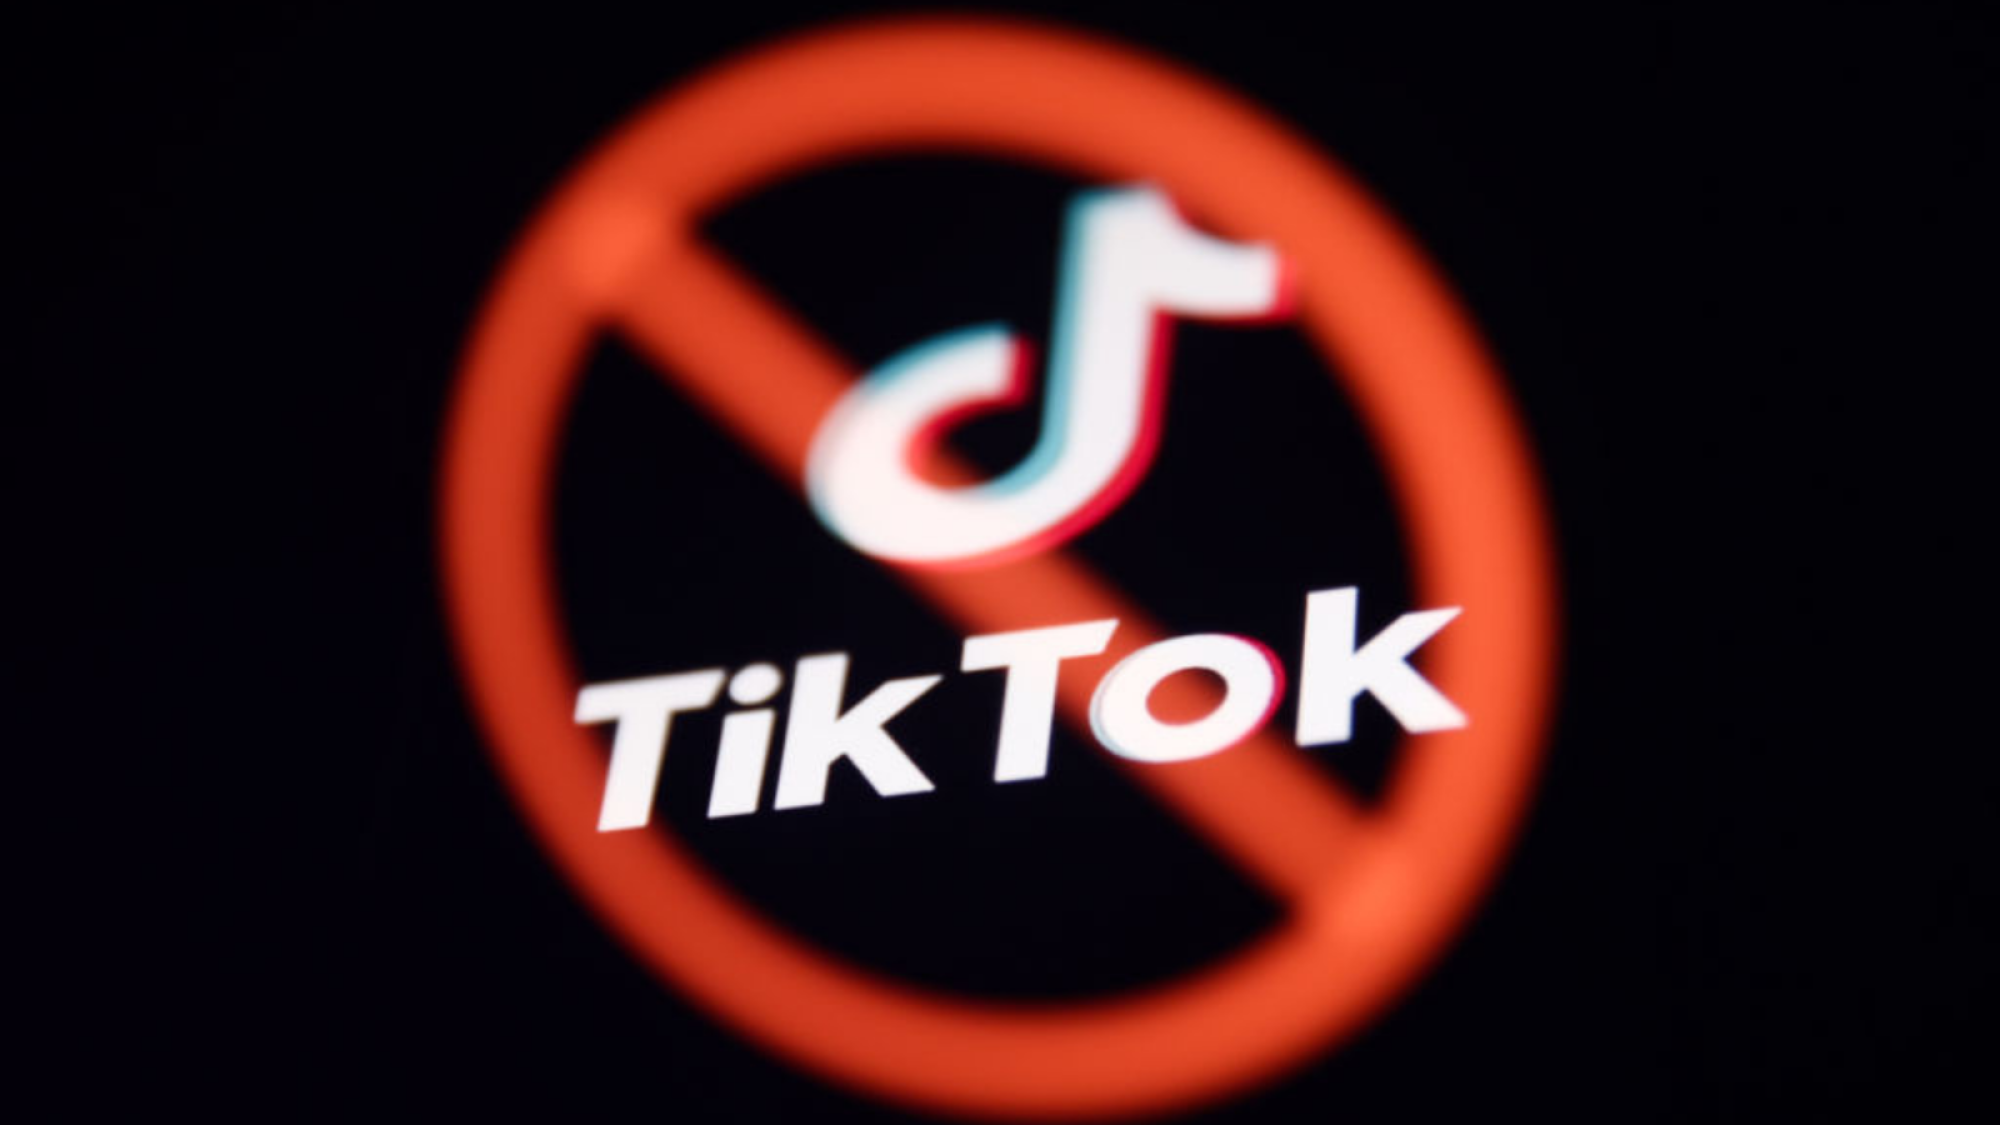 The TikTok logo with a cancellation symbol over it.